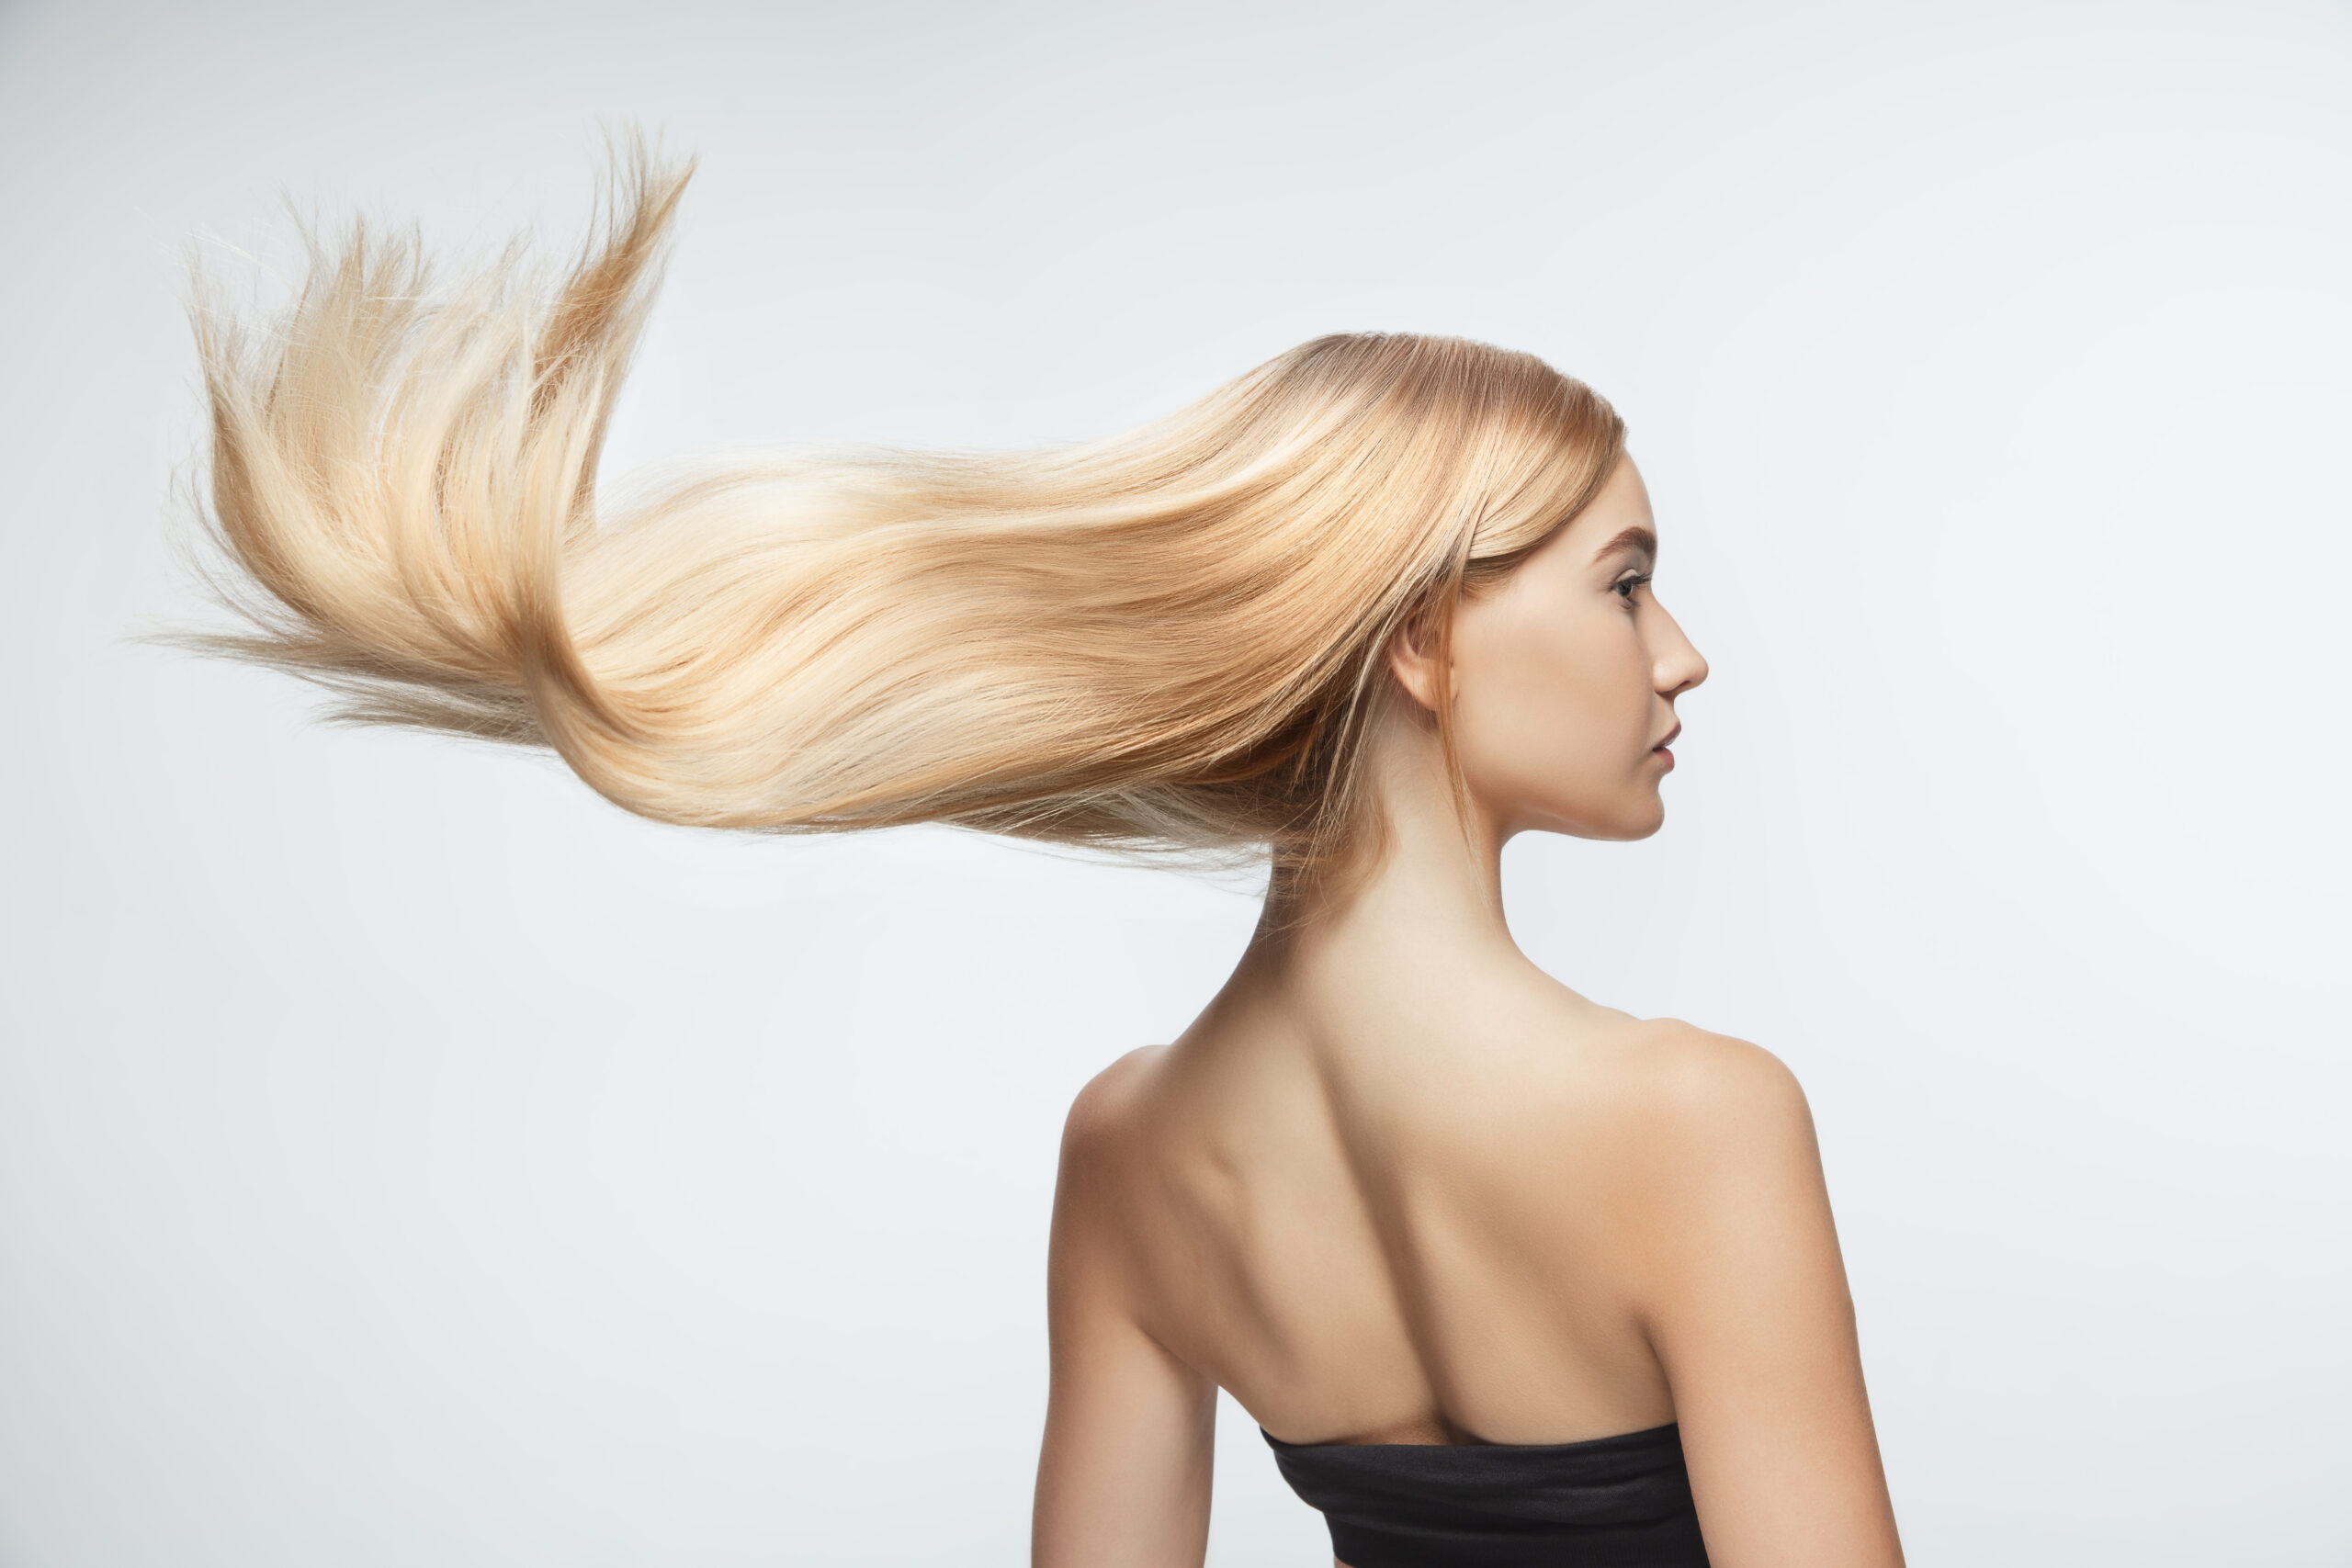 Splurgeing on Extensions To Get the Hair of Your Dreams—Is It Worth It?